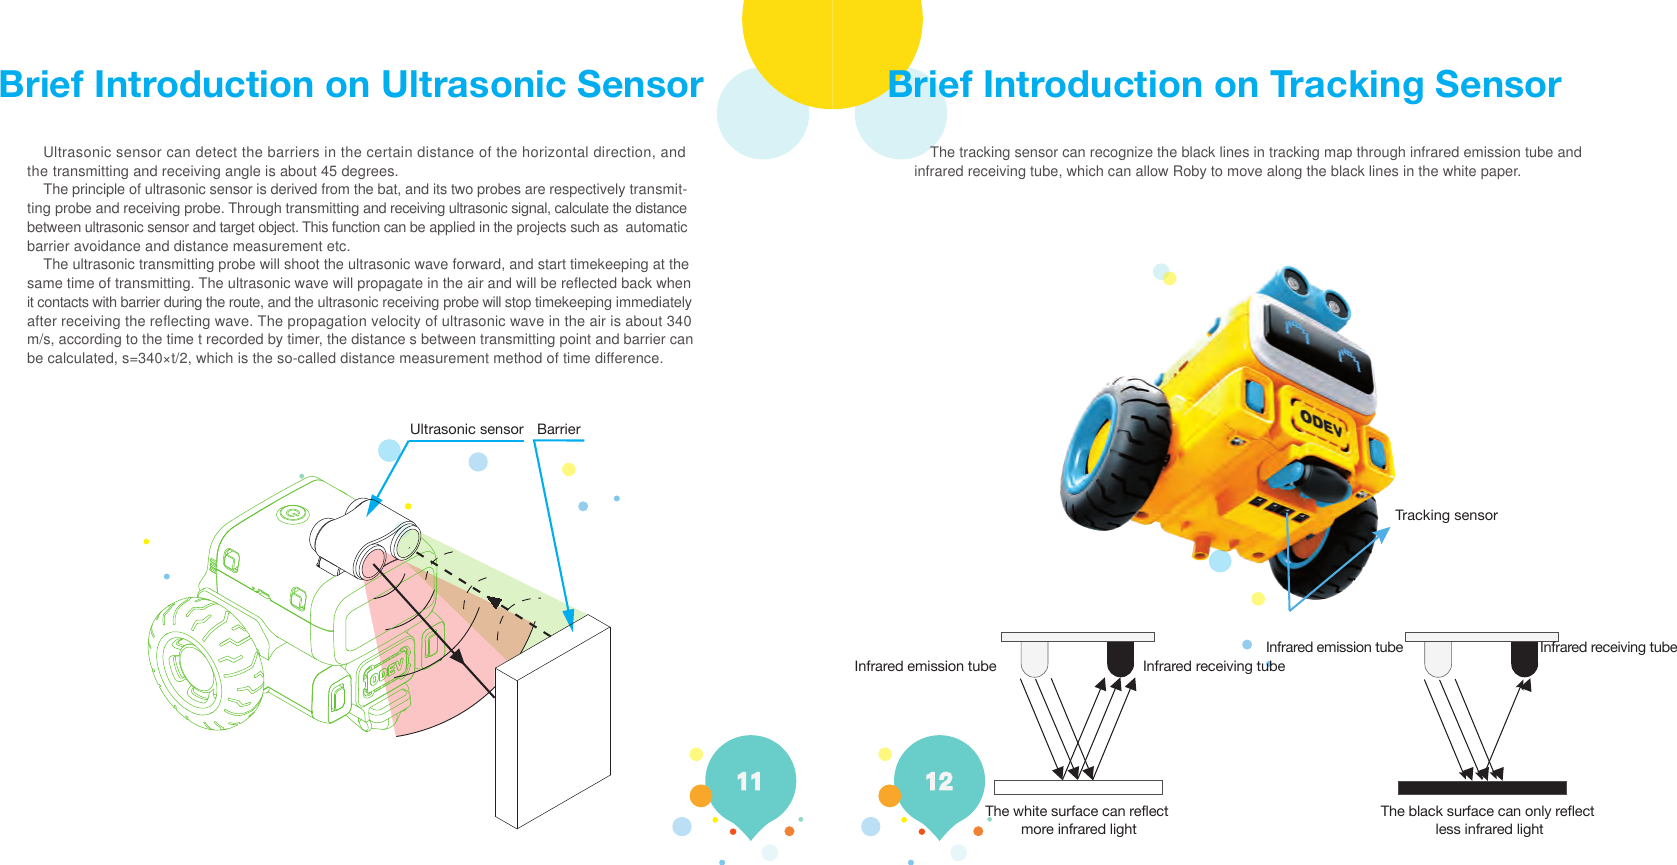 Brief Introduction on Ultrasonic Sensor    Ultrasonic sensor can detect the barriers in the certain distance of the horizontal direction, and the transmitting and receiving angle is about 45 degrees.    The principle of ultrasonic sensor is derived from the bat, and its two probes are respectively transmit-ting probe and receiving probe. Through transmitting and receiving ultrasonic signal, calculate the distance between ultrasonic sensor and target object. This function can be applied in the projects such as  automatic barrier avoidance and distance measurement etc.    The ultrasonic transmitting probe will shoot the ultrasonic wave forward, and start timekeeping at the same time of transmitting. The ultrasonic wave will propagate in the air and will be reflected back whenit contacts with barrier during the route, and the ultrasonic receiving probe will stop timekeeping immediately after receiving the reflecting wave. The propagation velocity of ultrasonic wave in the air is about 340 m/s, according to the time t recorded by timer, the distance s between transmitting point and barrier can be calculated, s=340×t/2, which is the so-called distance measurement method of time difference.    The tracking sensor can recognize the black lines in tracking map through infrared emission tube and infrared receiving tube, which can allow Roby to move along the black lines in the white paper. Ultrasonic sensor  BarrierTracking sensorInfrared emission tube Infrared receiving tubeInfrared receiving tubeThe white surface can reflect more infrared lightThe black surface can only reflect less infrared lightInfrared emission tubeBrief Introduction on Tracking Sensor